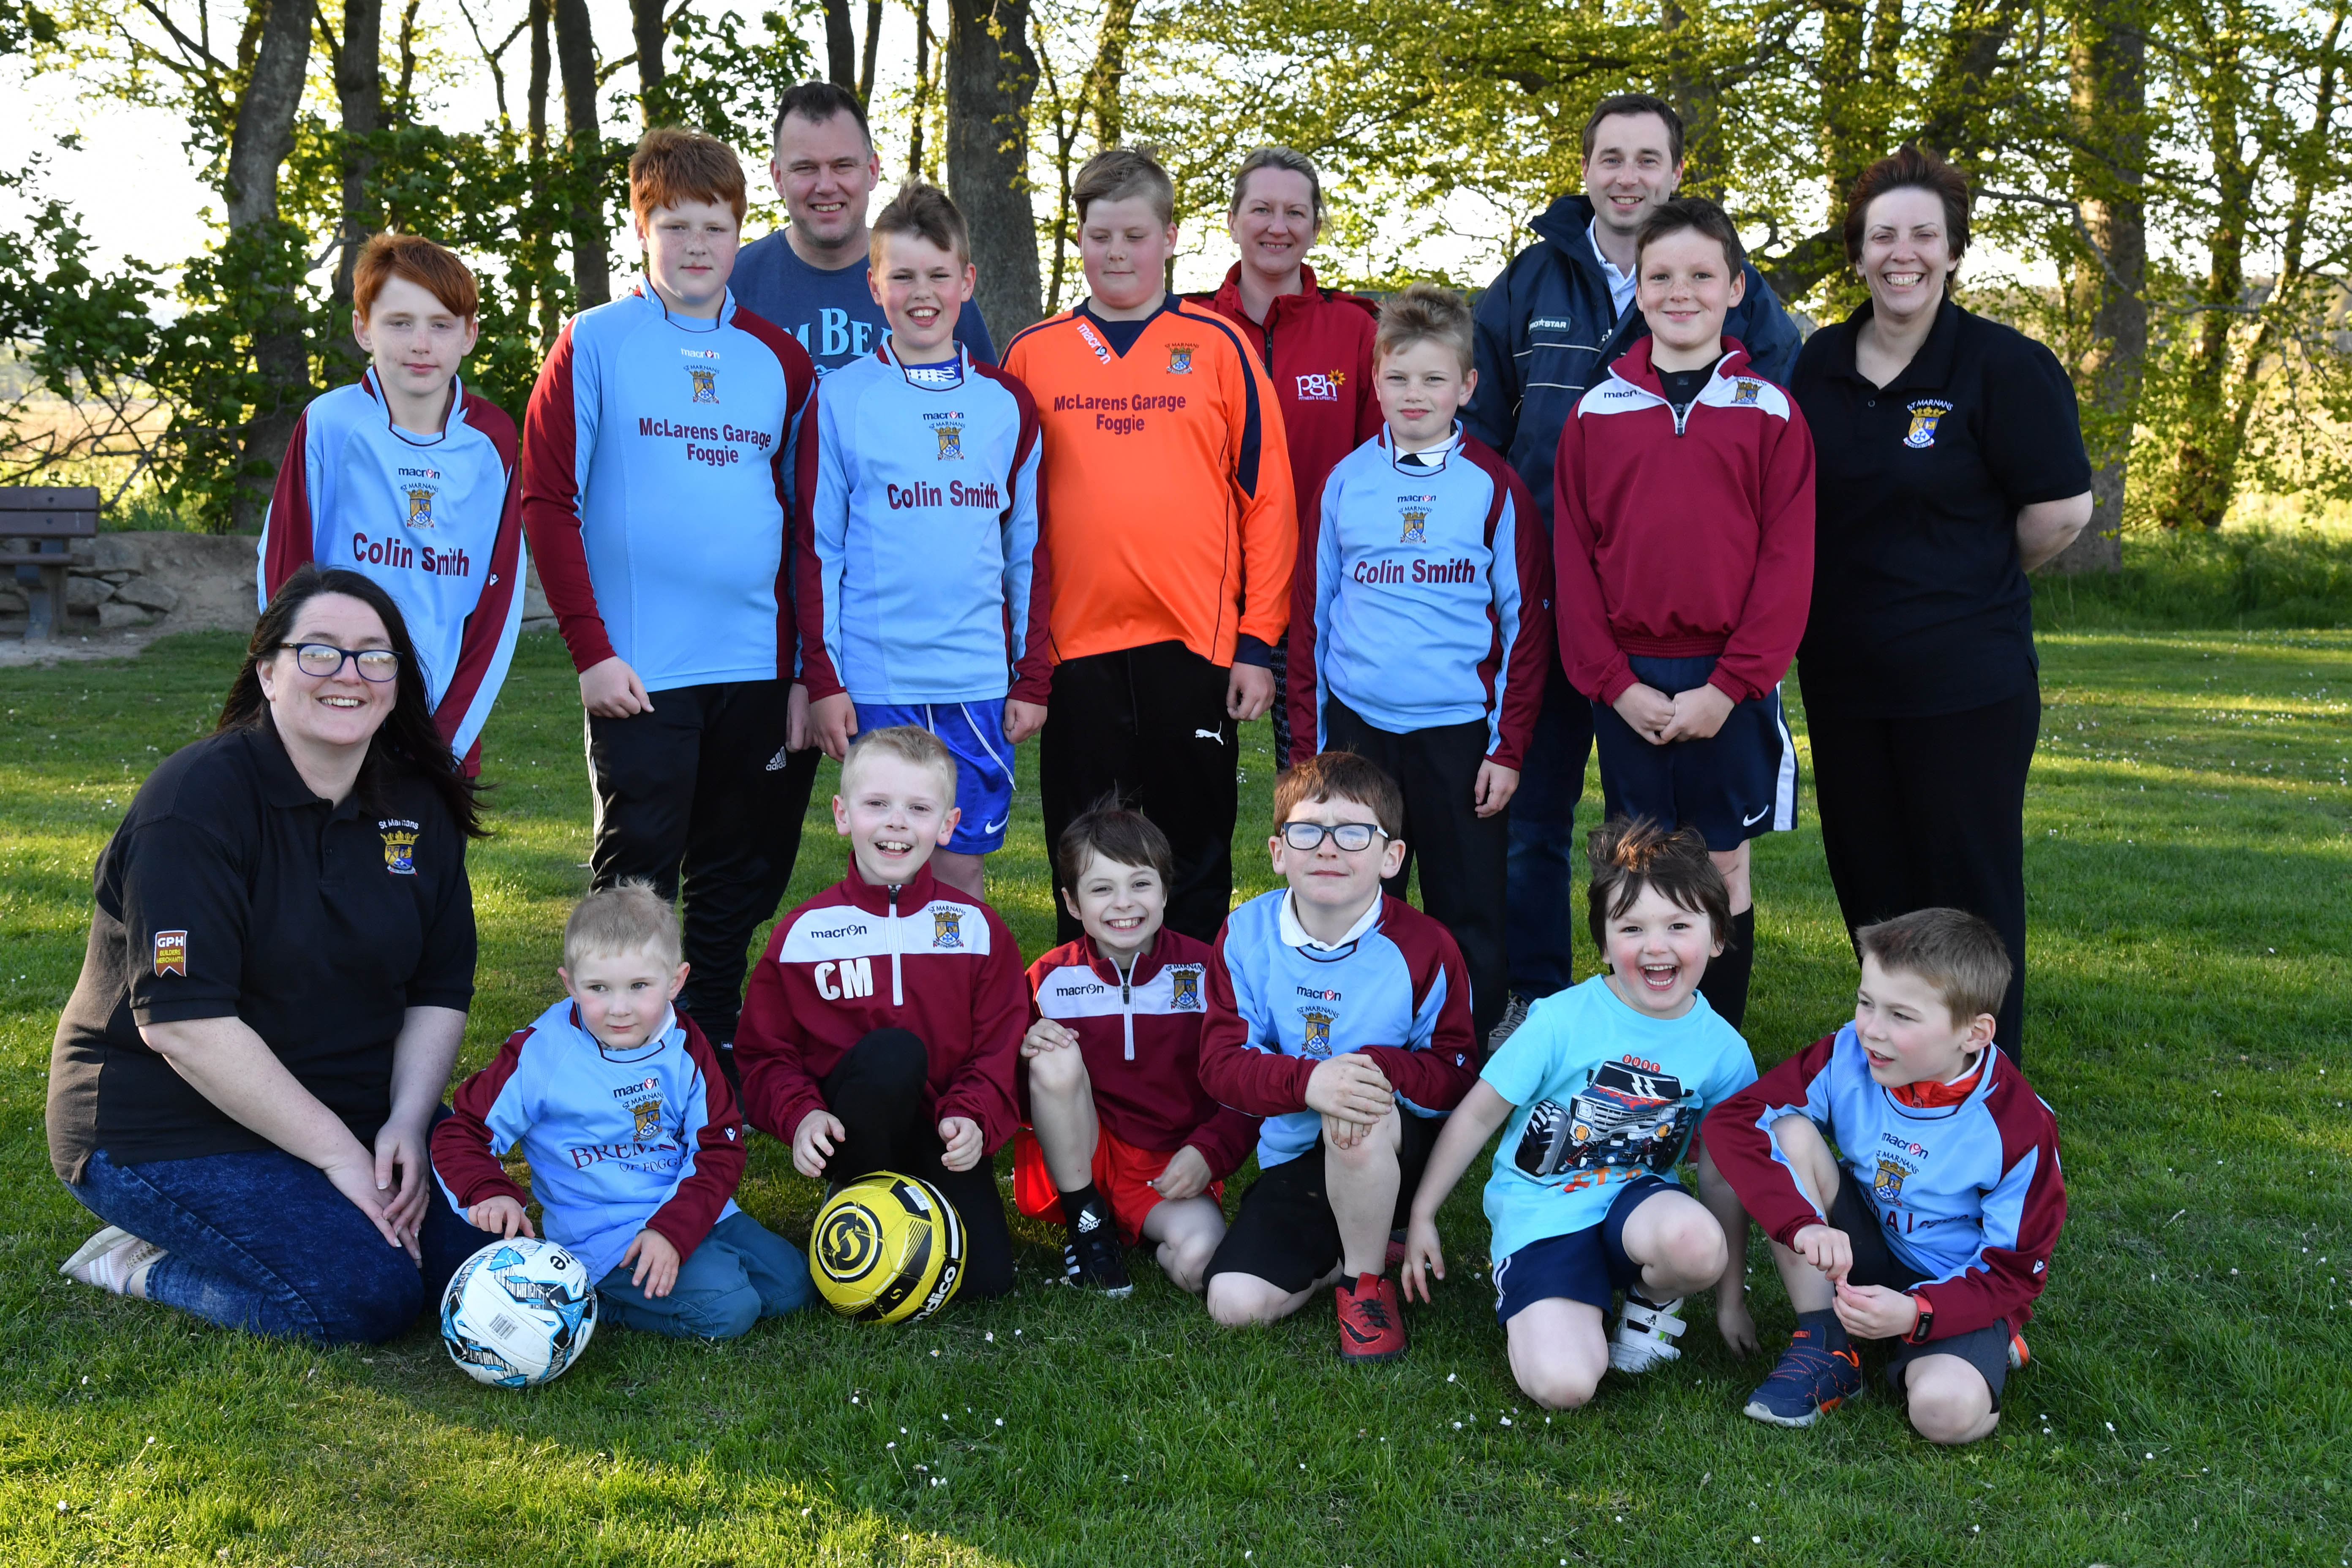 St Marnans sports club chairwoman Fiona Calder (l) with committee members and some of the youngsters who take part in the club's activities.